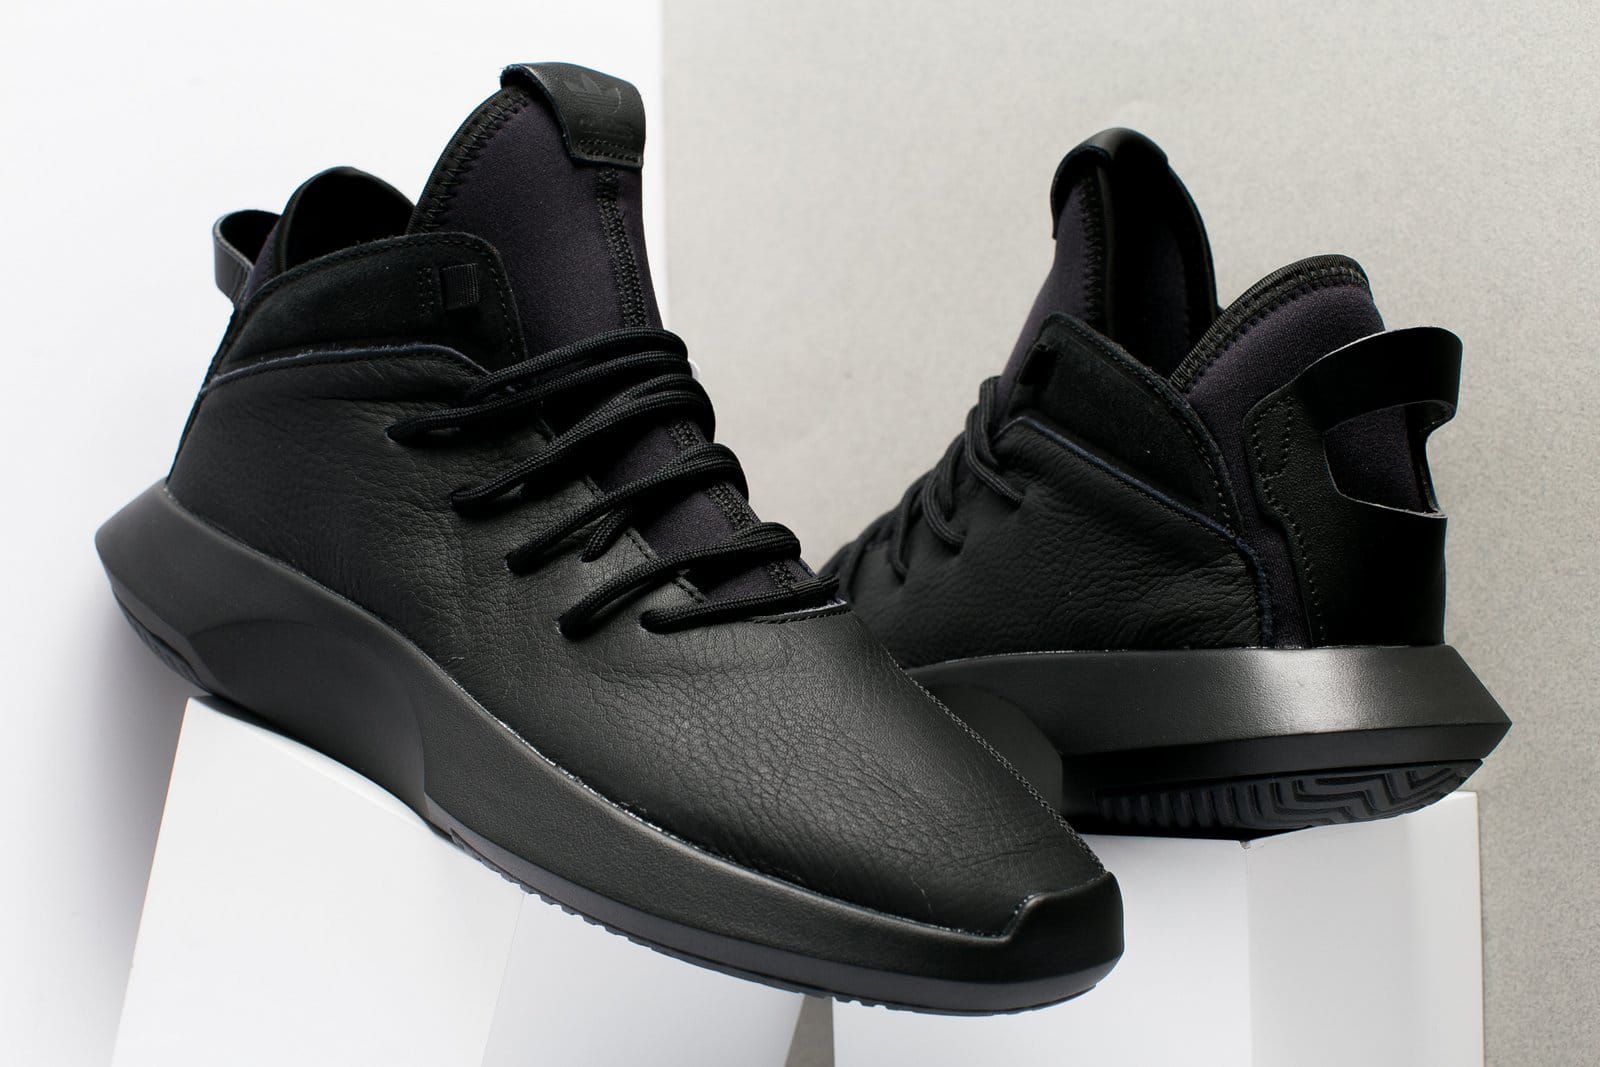 adidas all black leather shoes